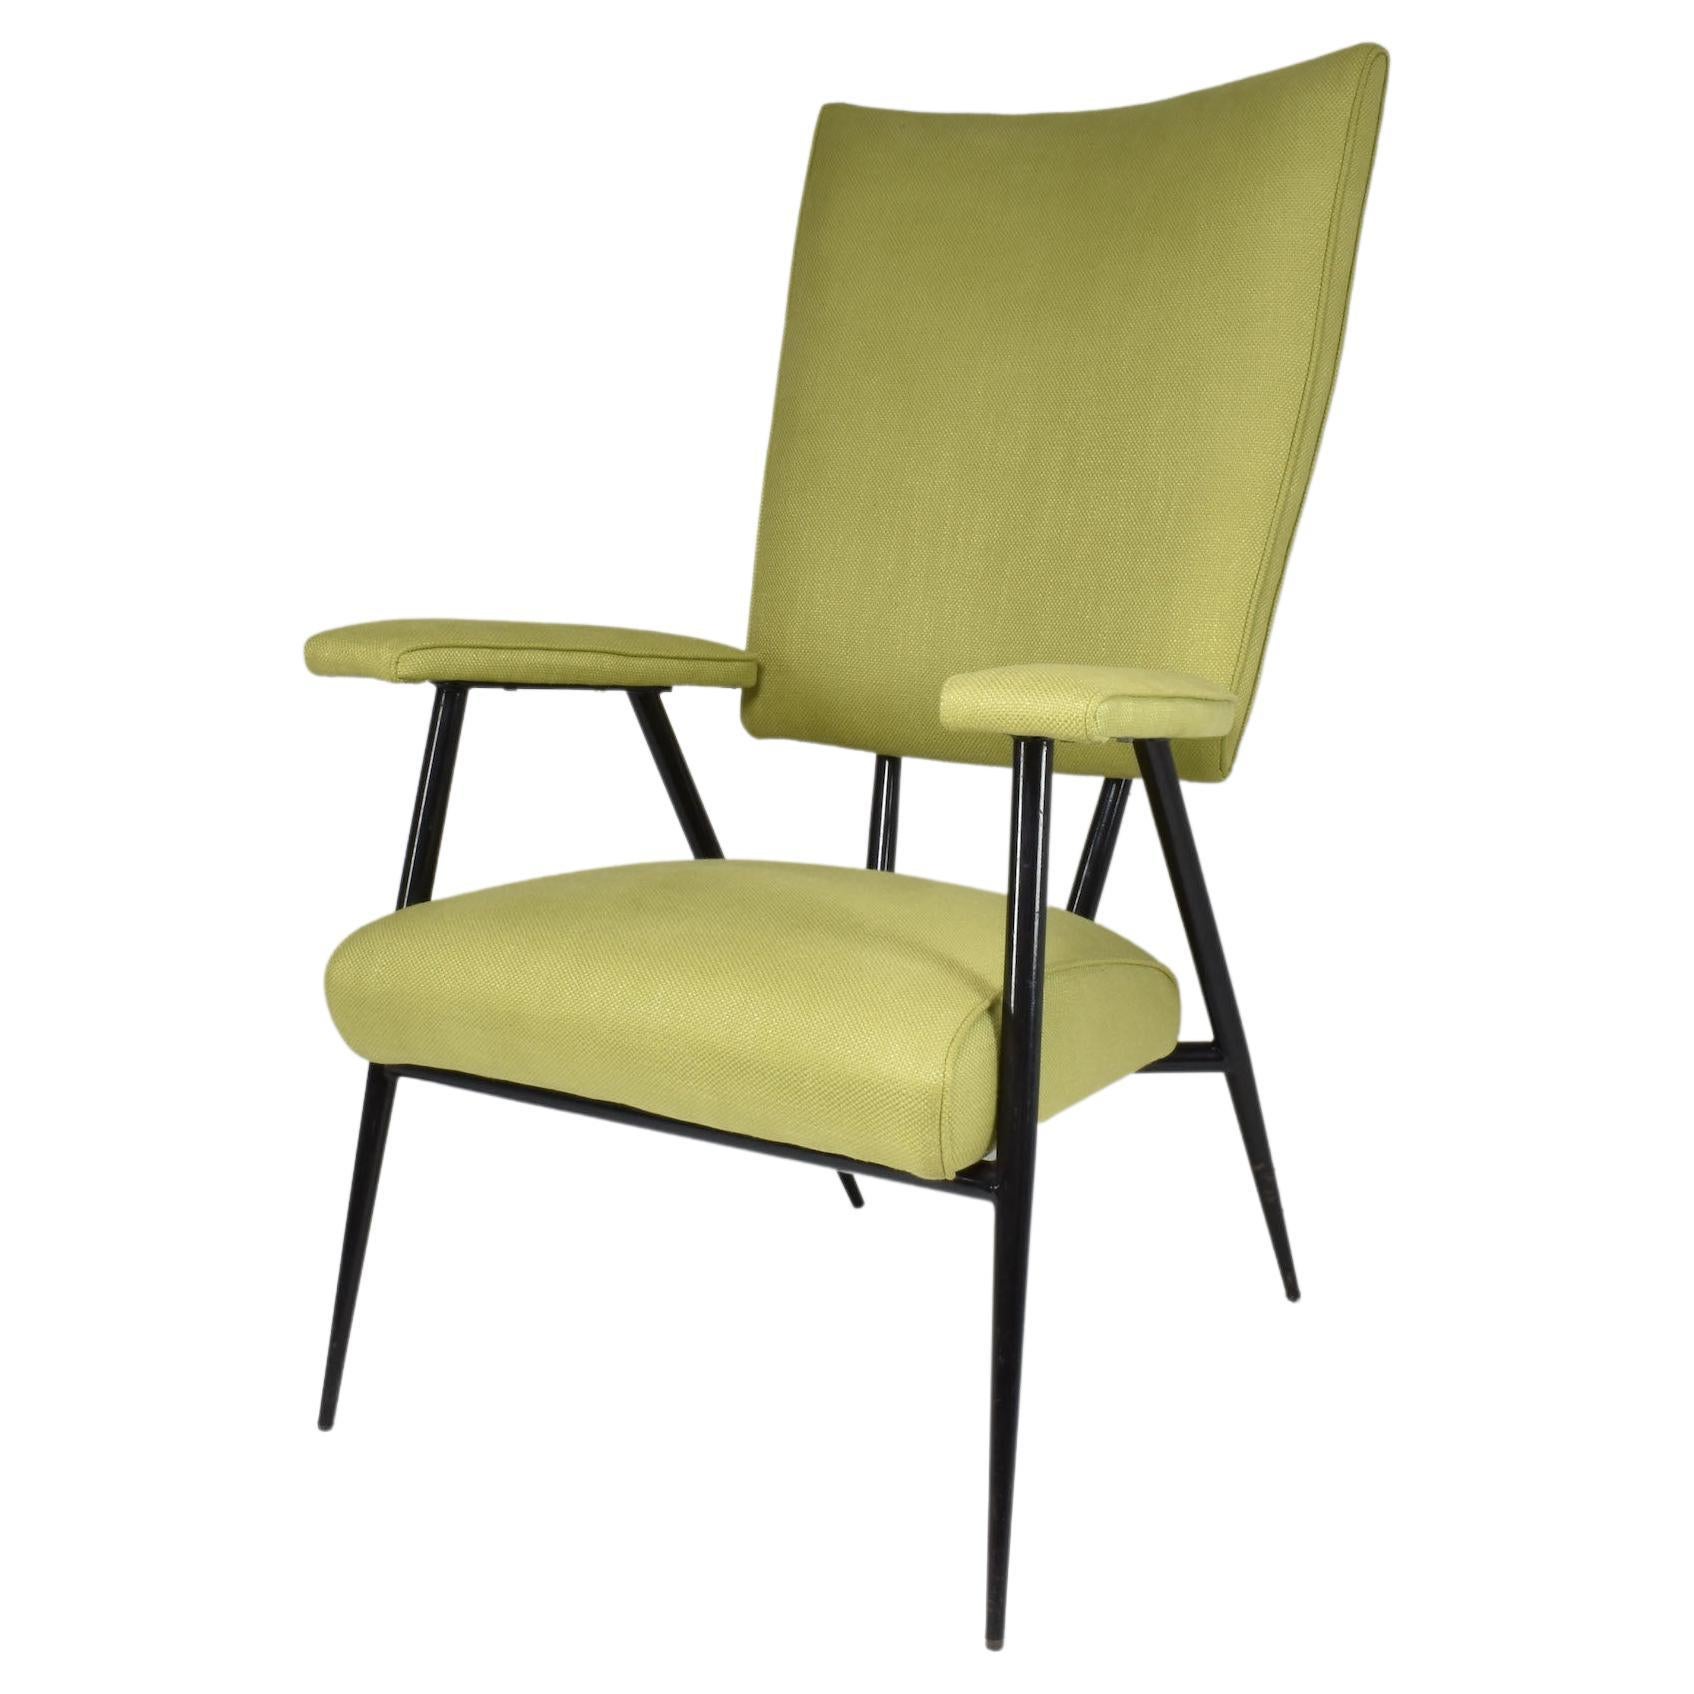 1950's, French Mid-century modern Steel Armchair For Sale